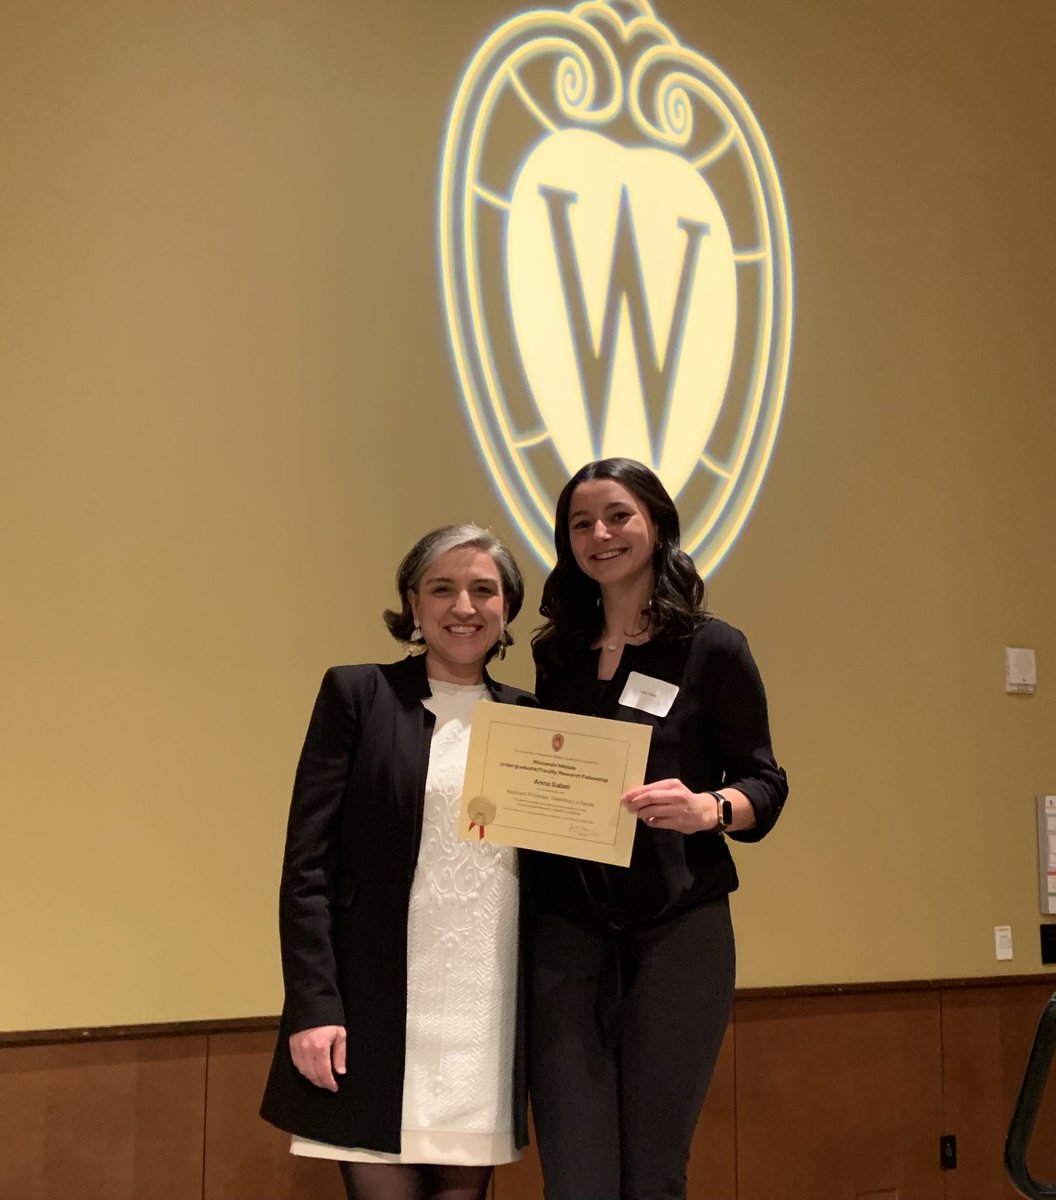 Congratulations to my super student @annasabel1 @uwgenetics and 2023 undergrad fellow of @UWCVRC receving the Wisconsin Hilldale Undergraduate Research Fellowship from @uwchancellor! Very proud PI! 🧫🫀🧬@UWMadisonCRB